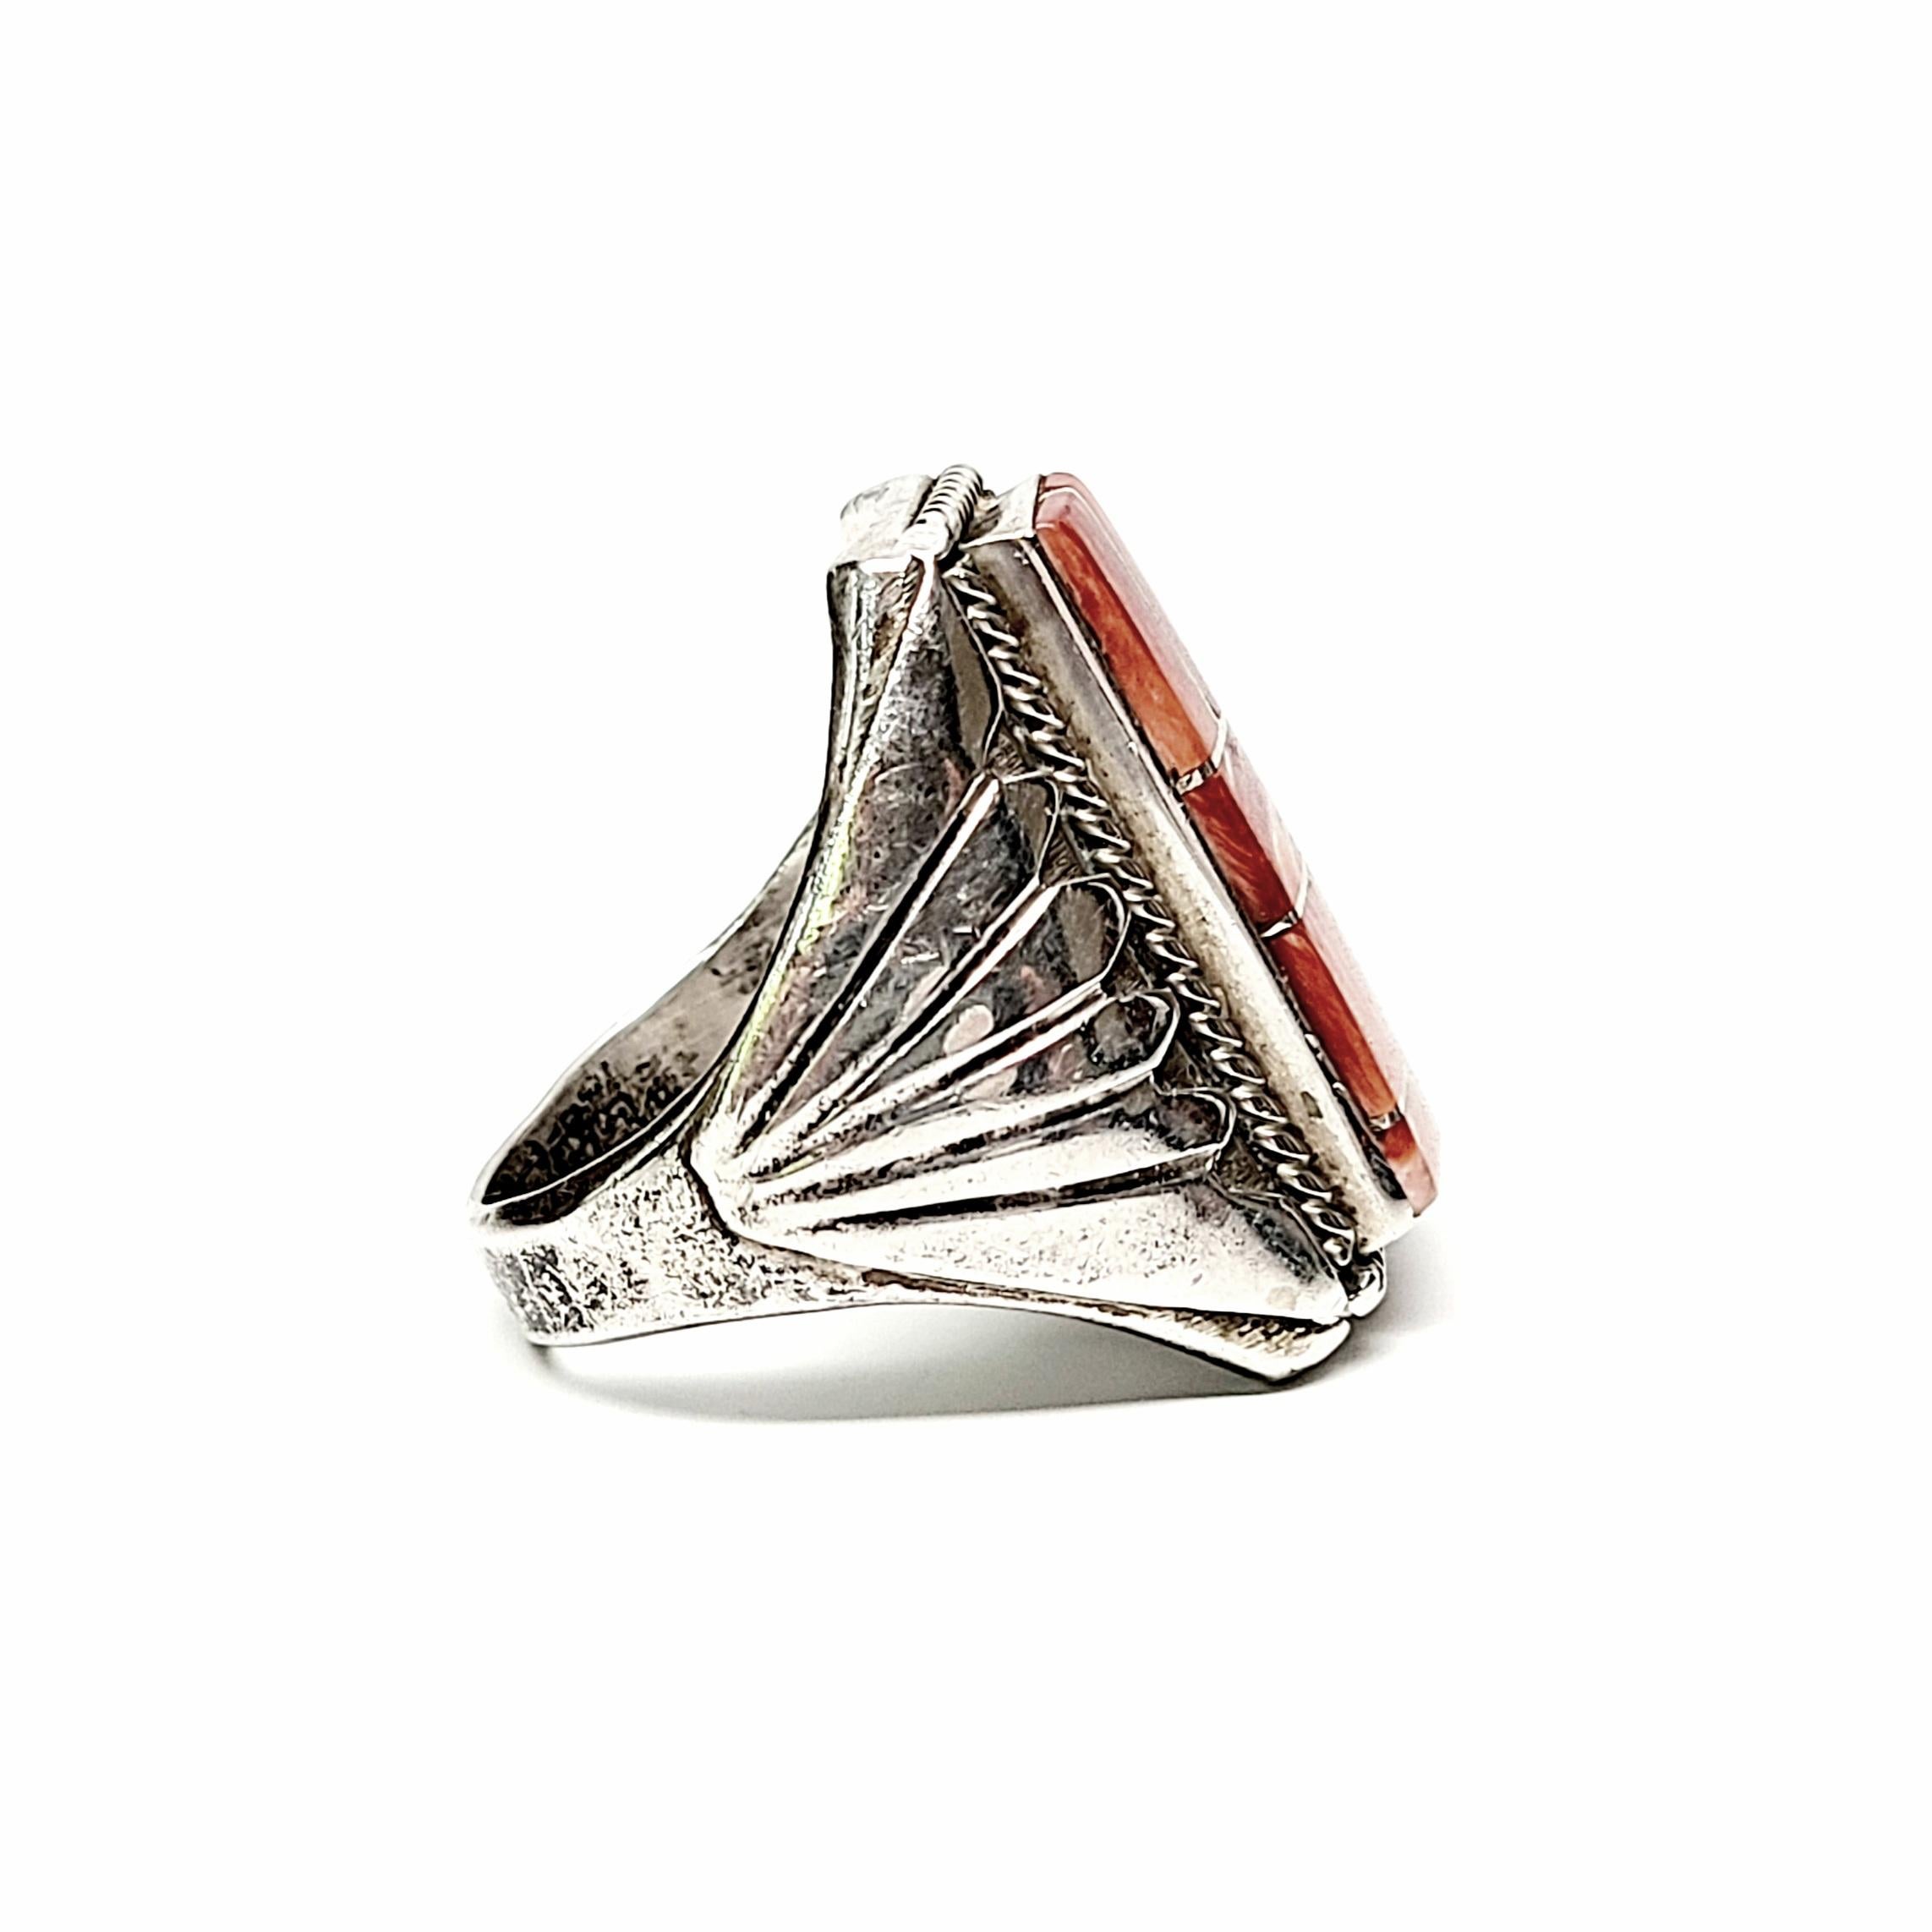 Signed CW Native American sterling silver and spiny oyster men's channel inlay ring.

Size 12

Features beautiful and intricate channel inlay of spiny oyster in a large and substantial ring with rope textured frame and metal overlay